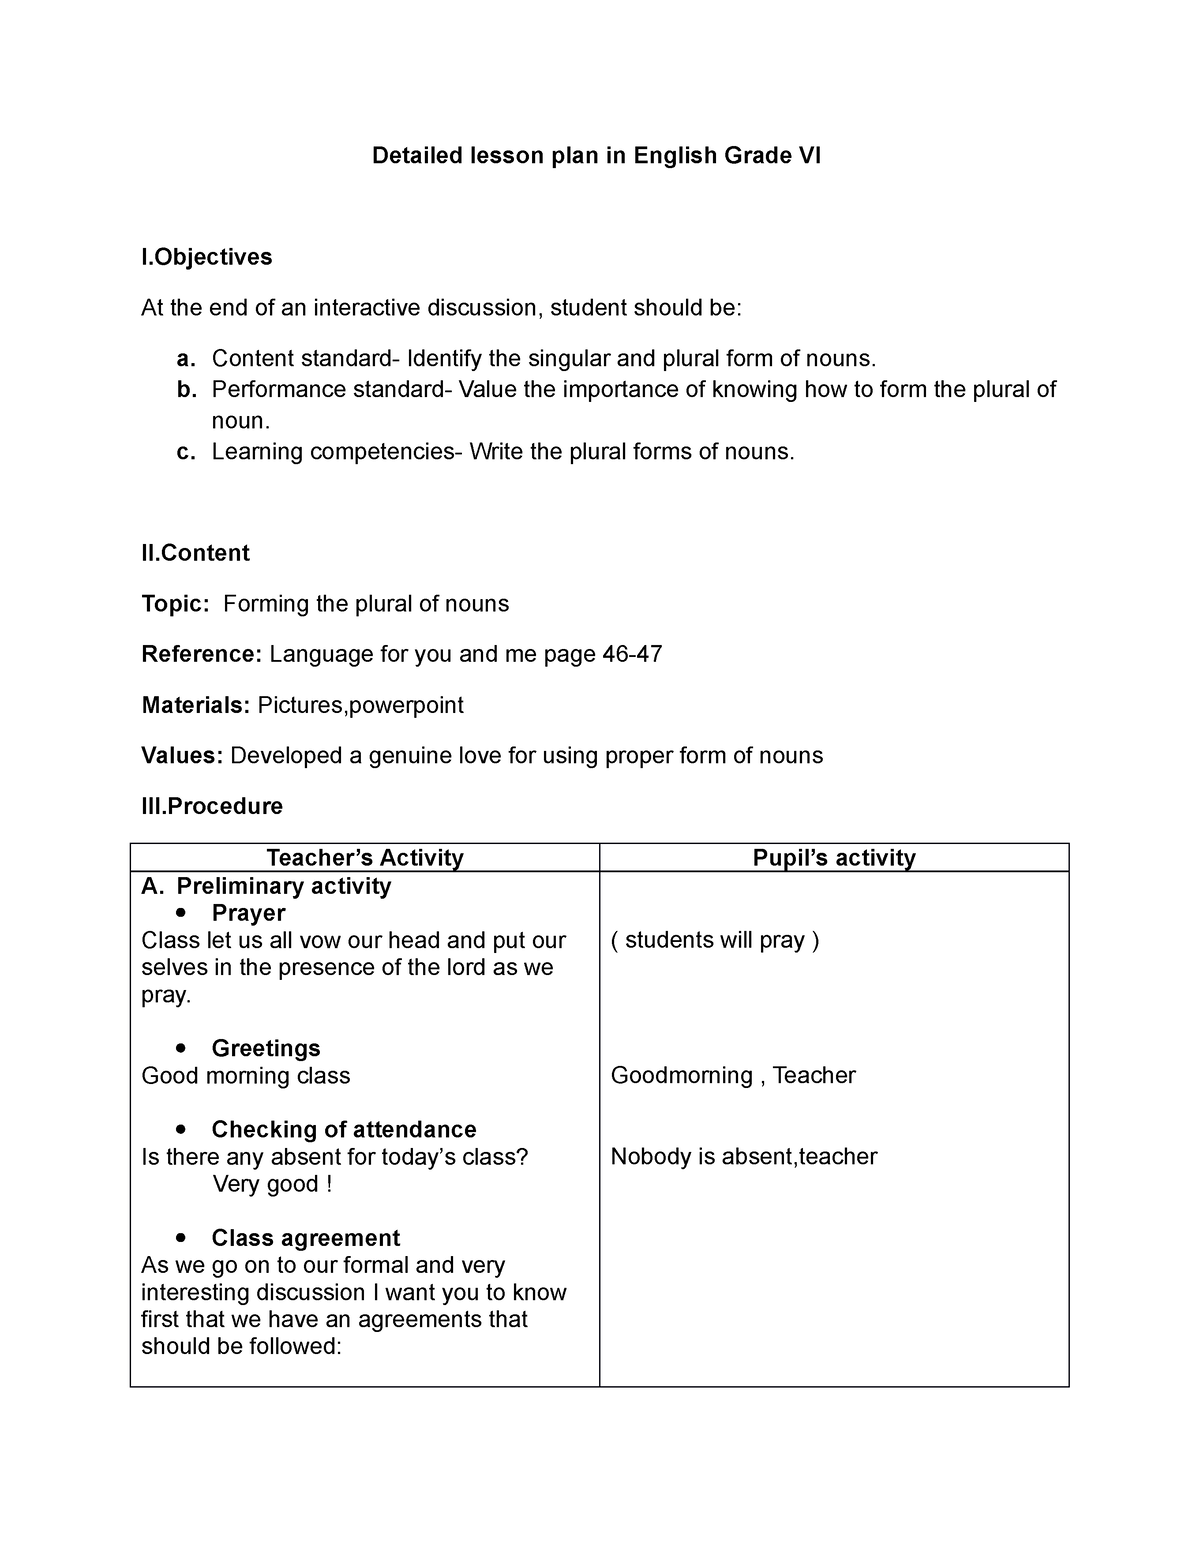 Detailed Lesson Plan In English Grade VI 1 Content Standard Identify The Singular And Plural 